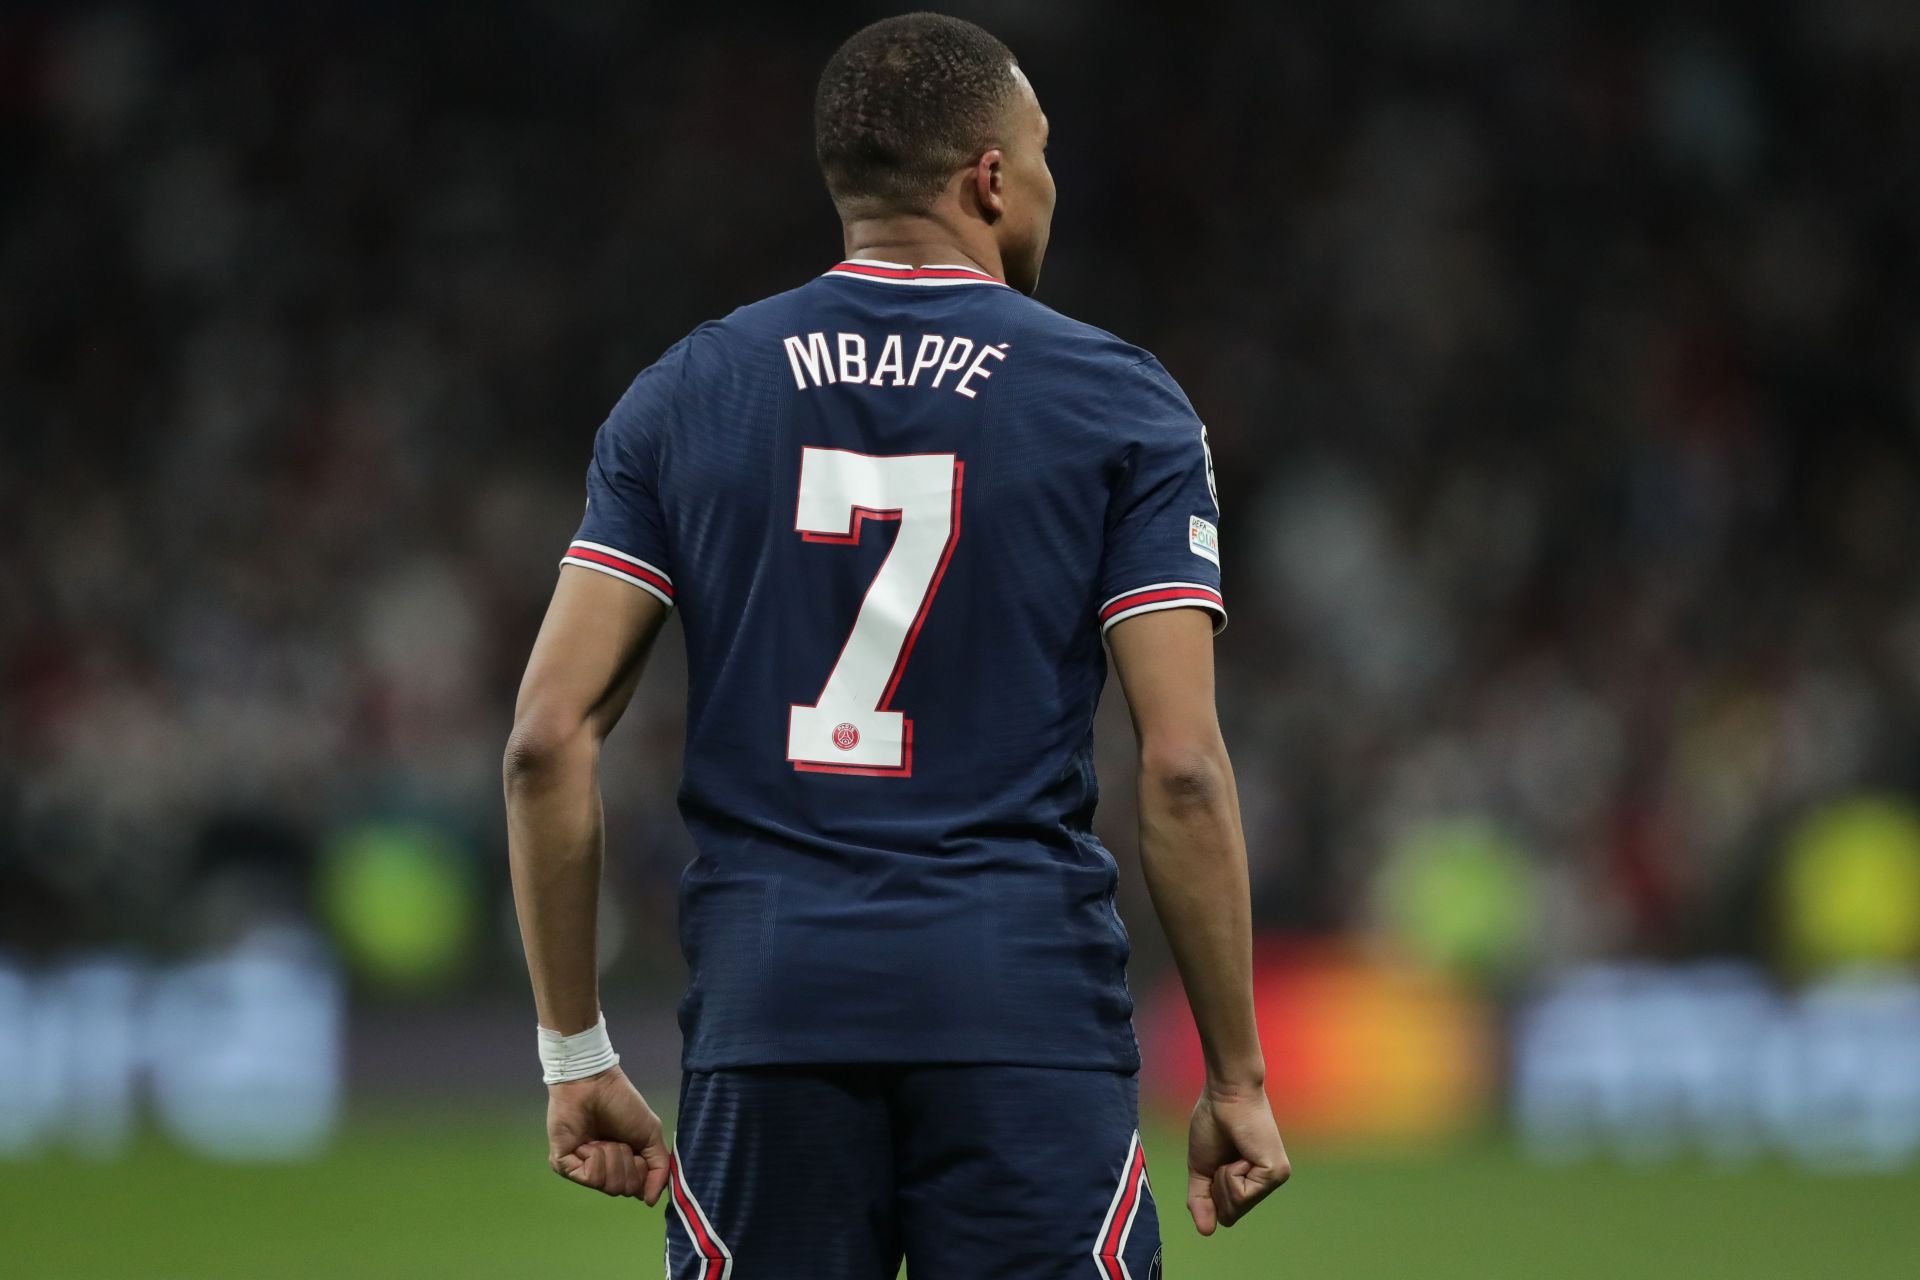 Kylian Mbappe is one of the most prominent players available on a free transfer